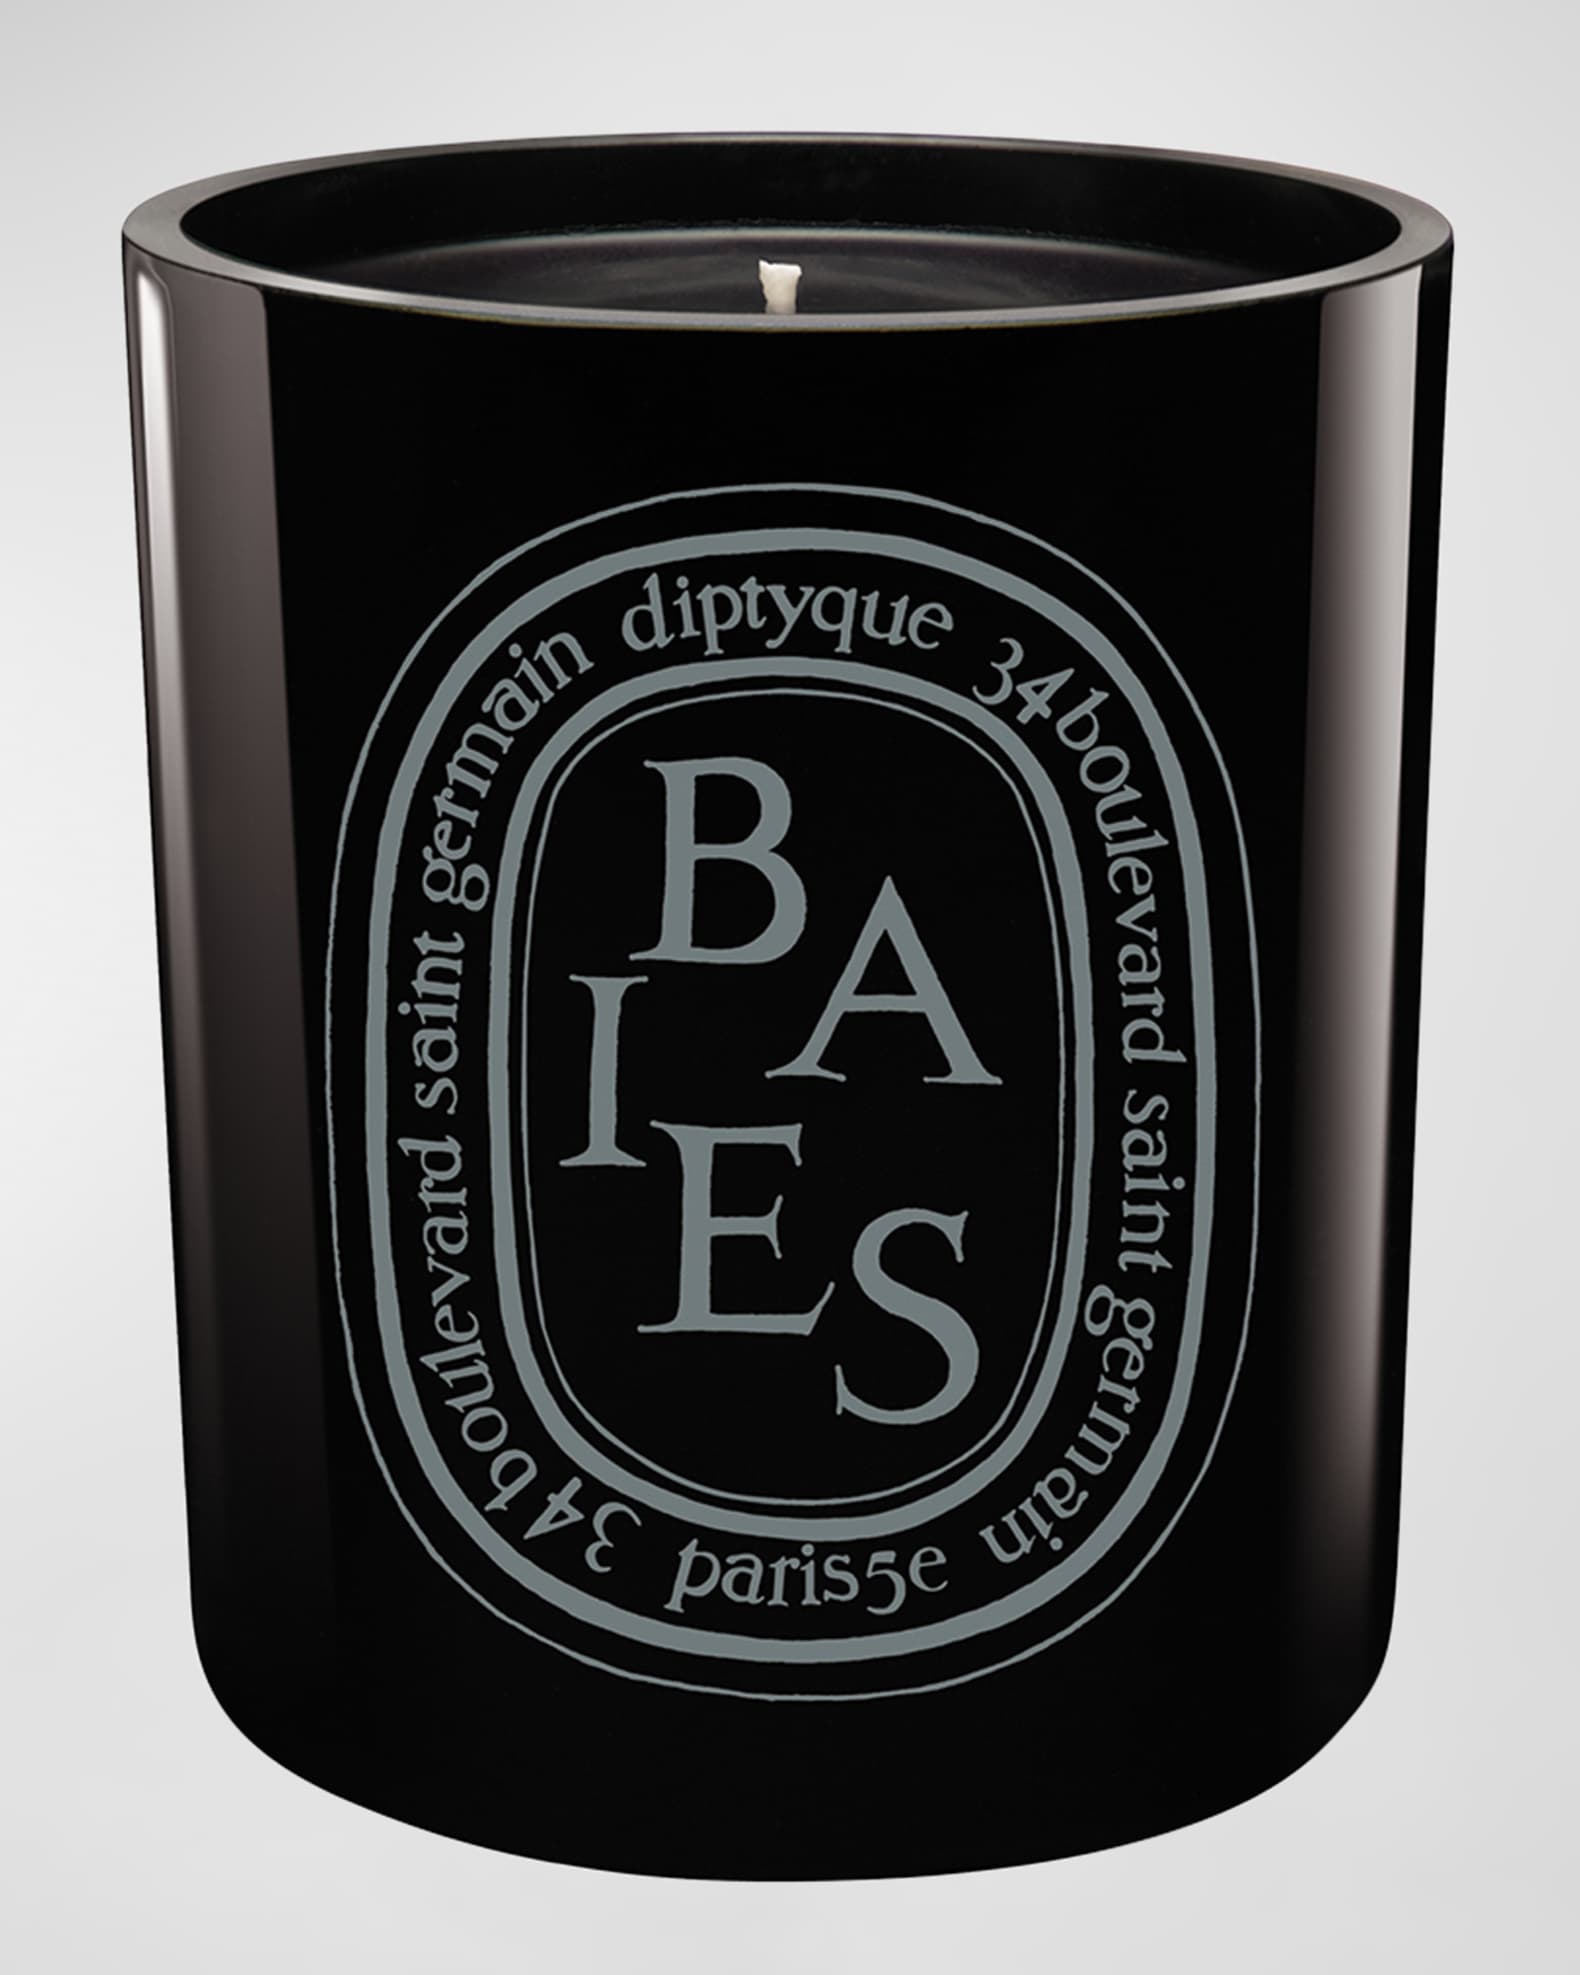 Baies (Berries) Scented Candle | Neiman Marcus